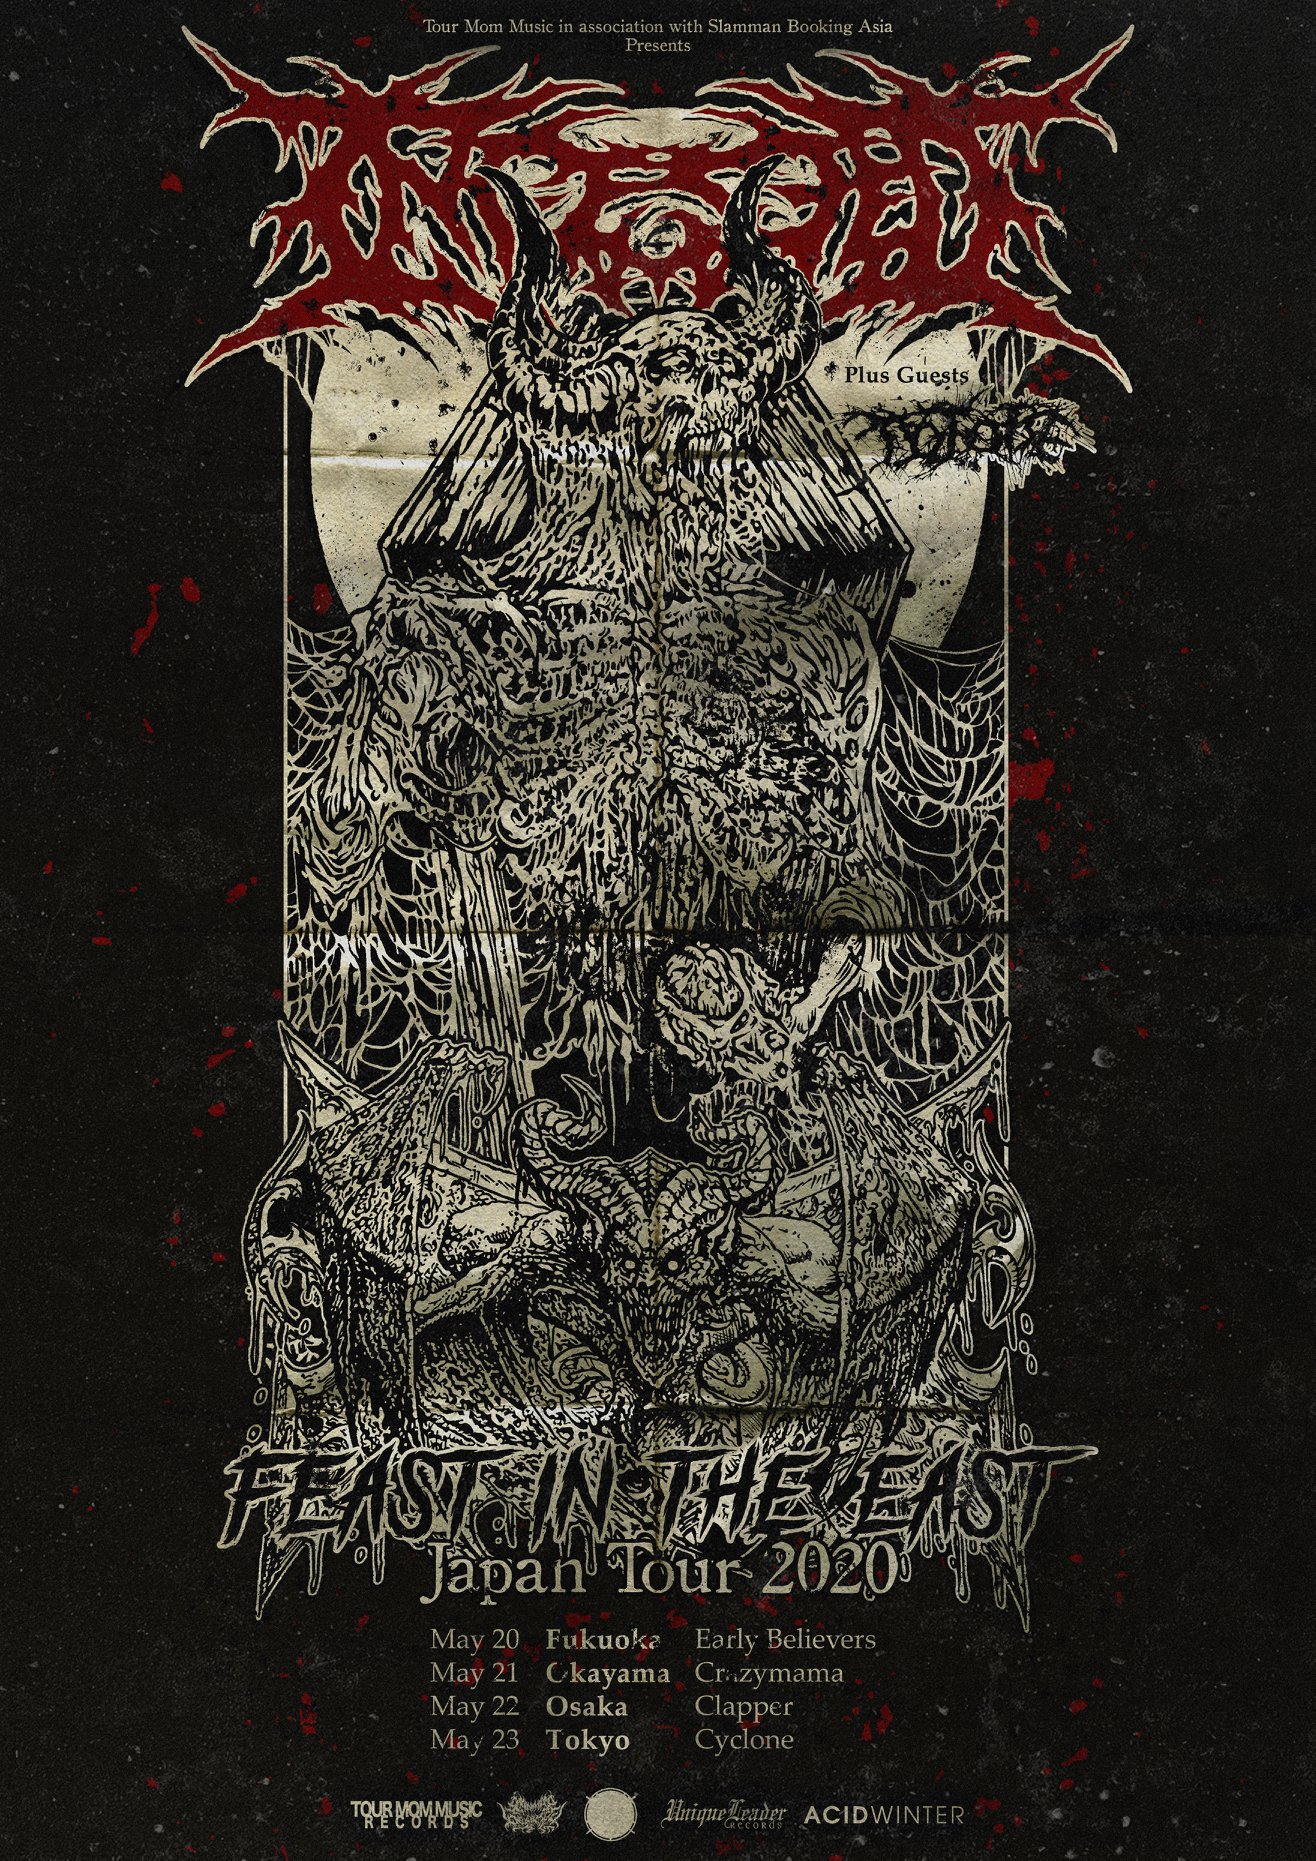 UK Metal Band Ingested Announce Japan Tour Unite Asia